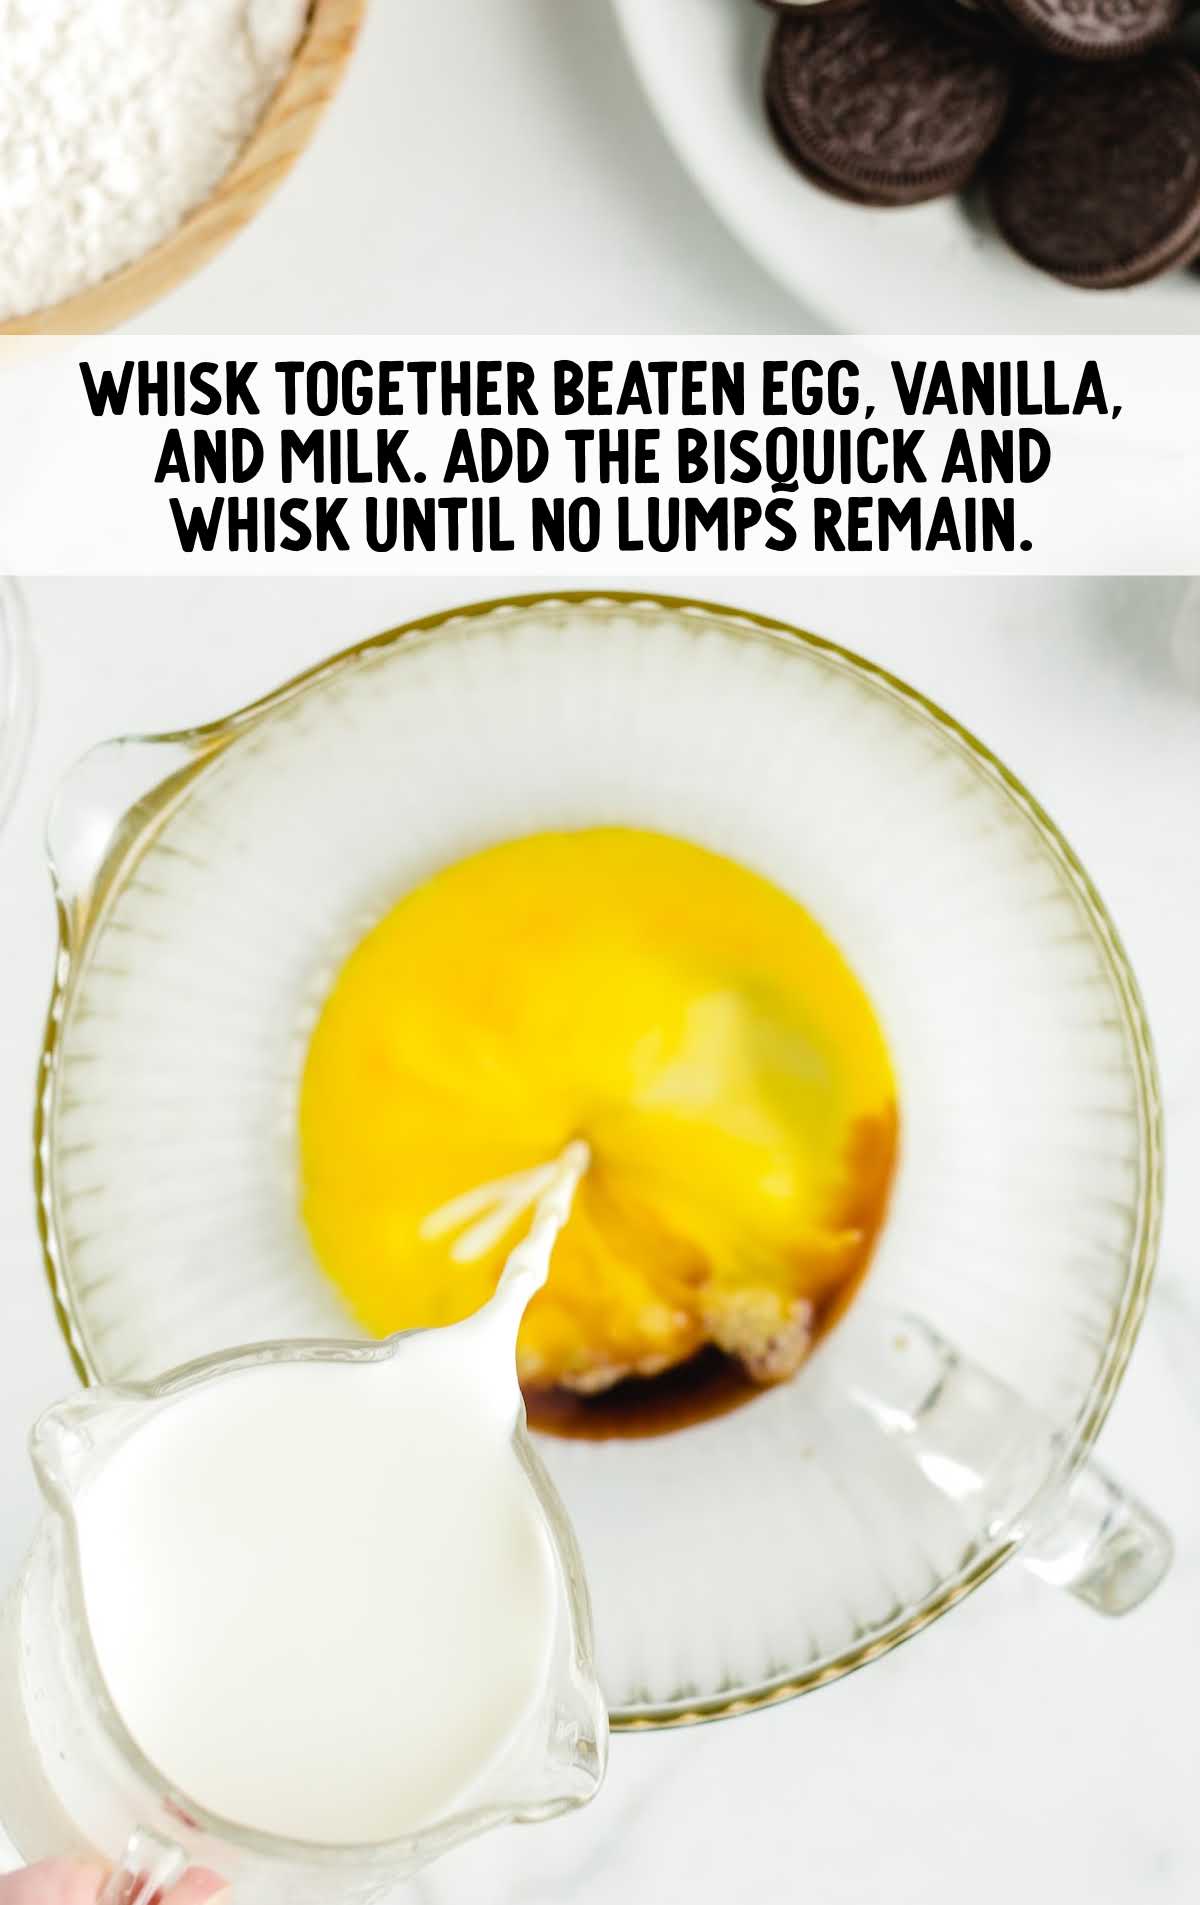 eggs, milk, vanilla, and bisquick whisked together in a cup